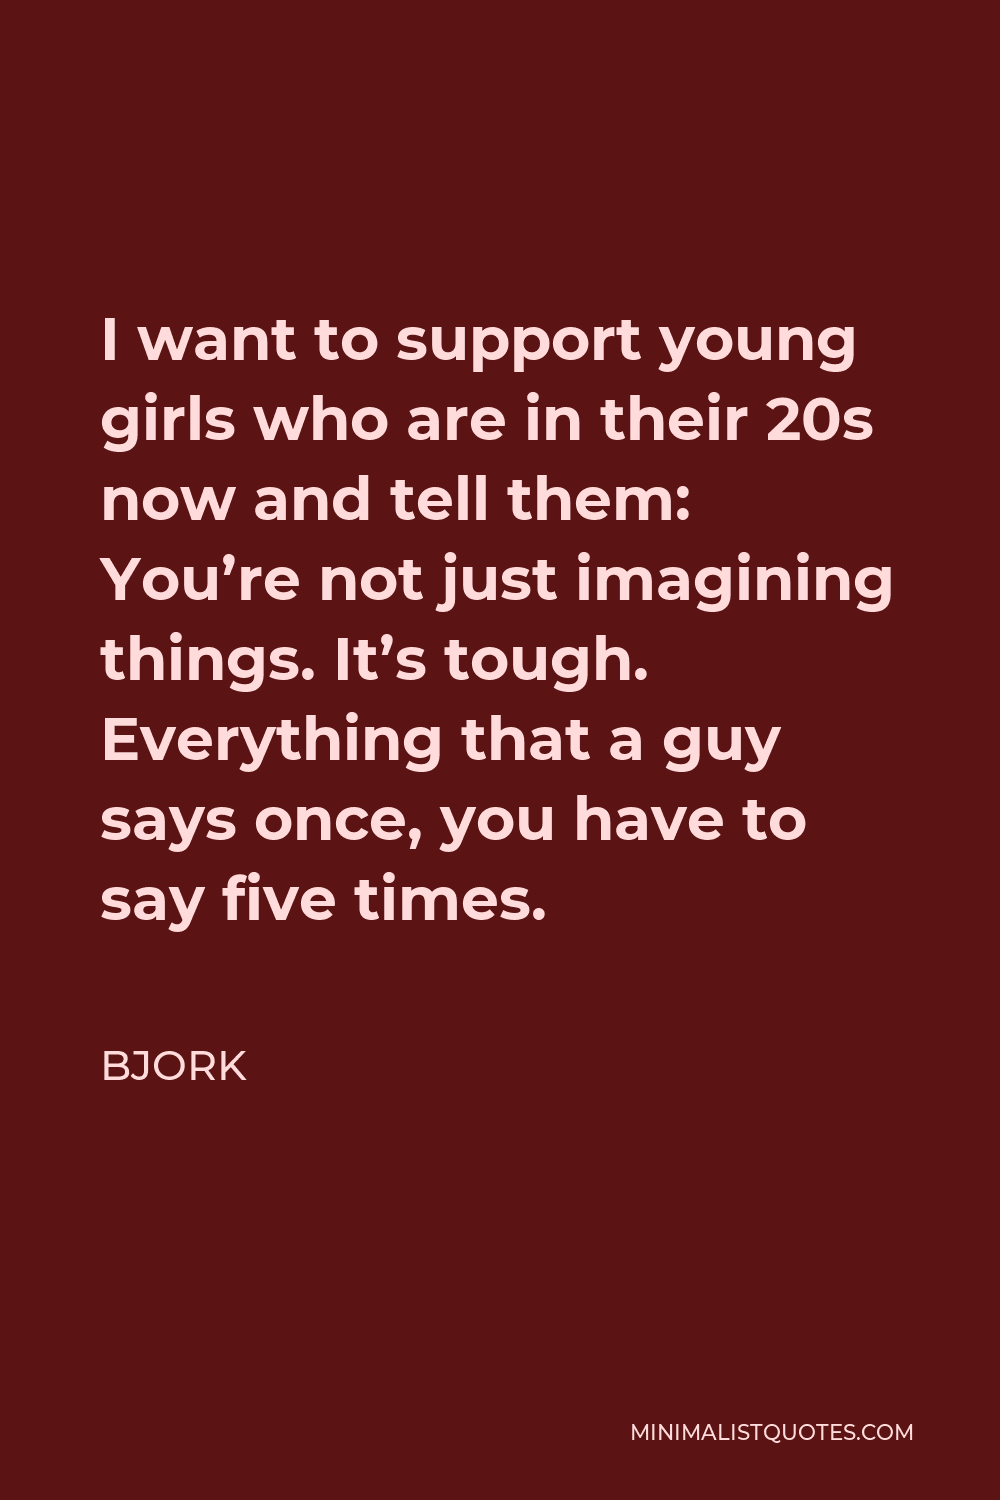 Bjork Quote - I want to support young girls who are in their 20s now and tell them: You’re not just imagining things. It’s tough. Everything that a guy says once, you have to say five times.